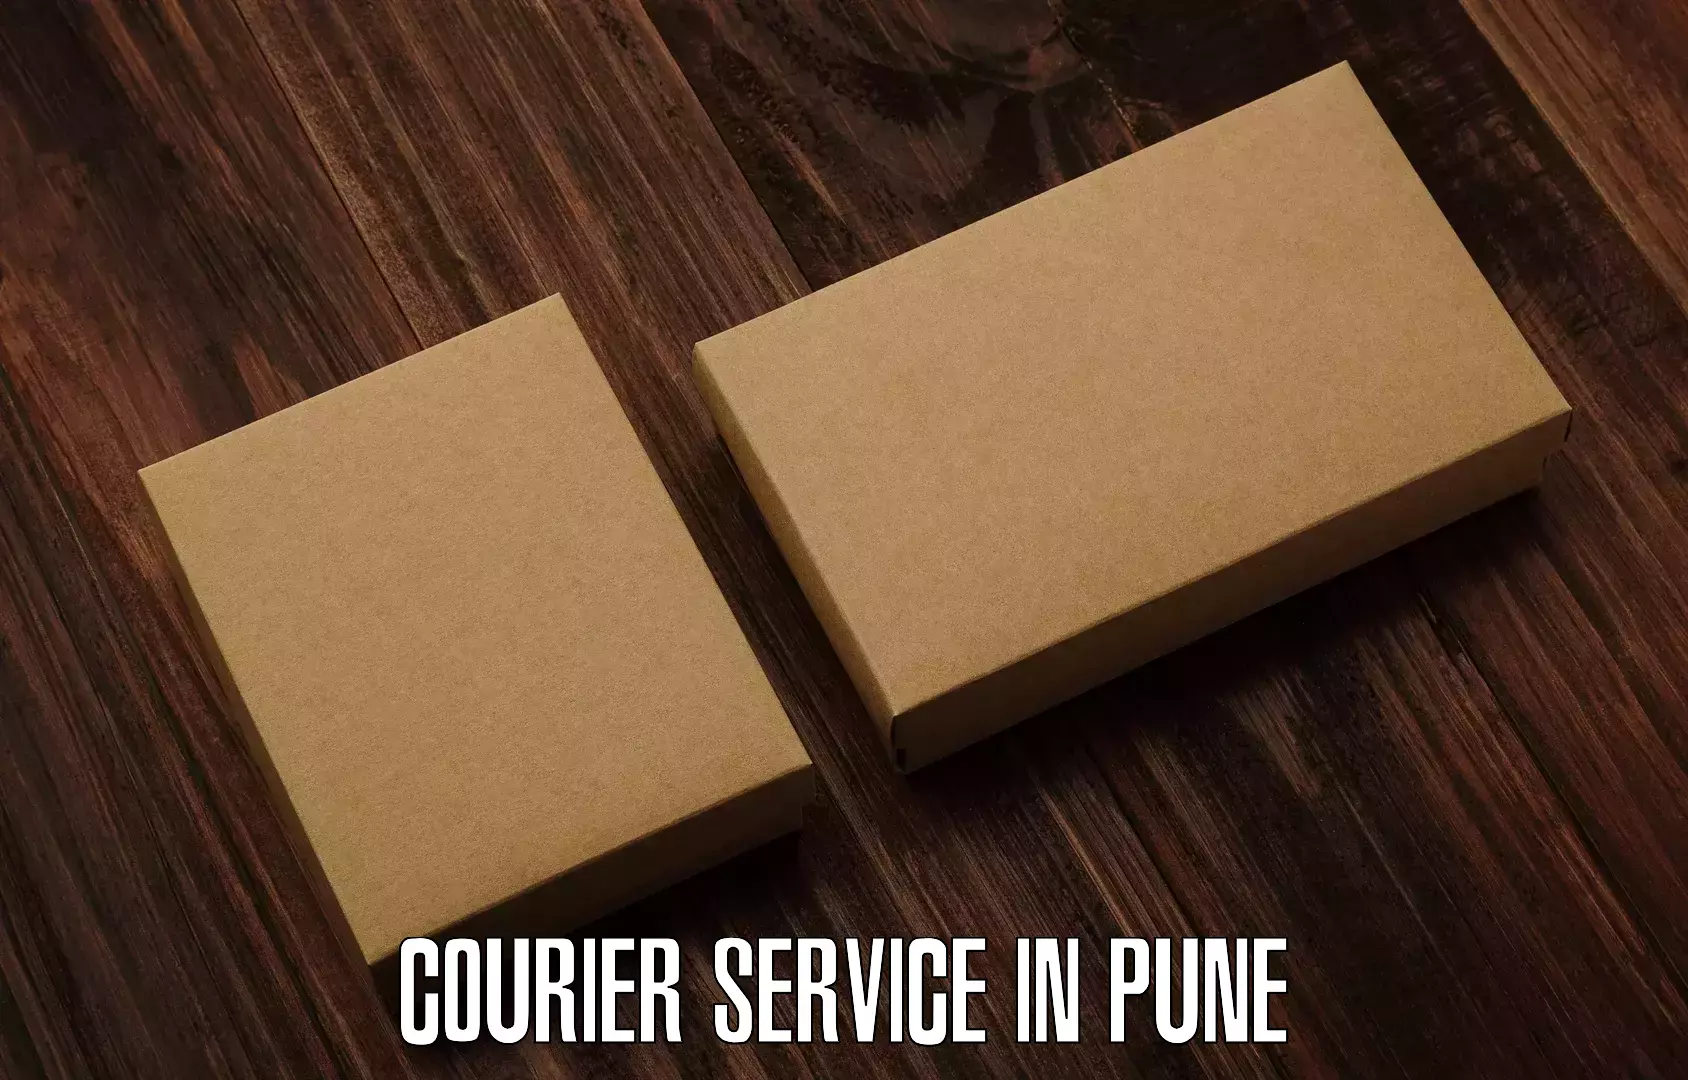 On-demand shipping options in Pune